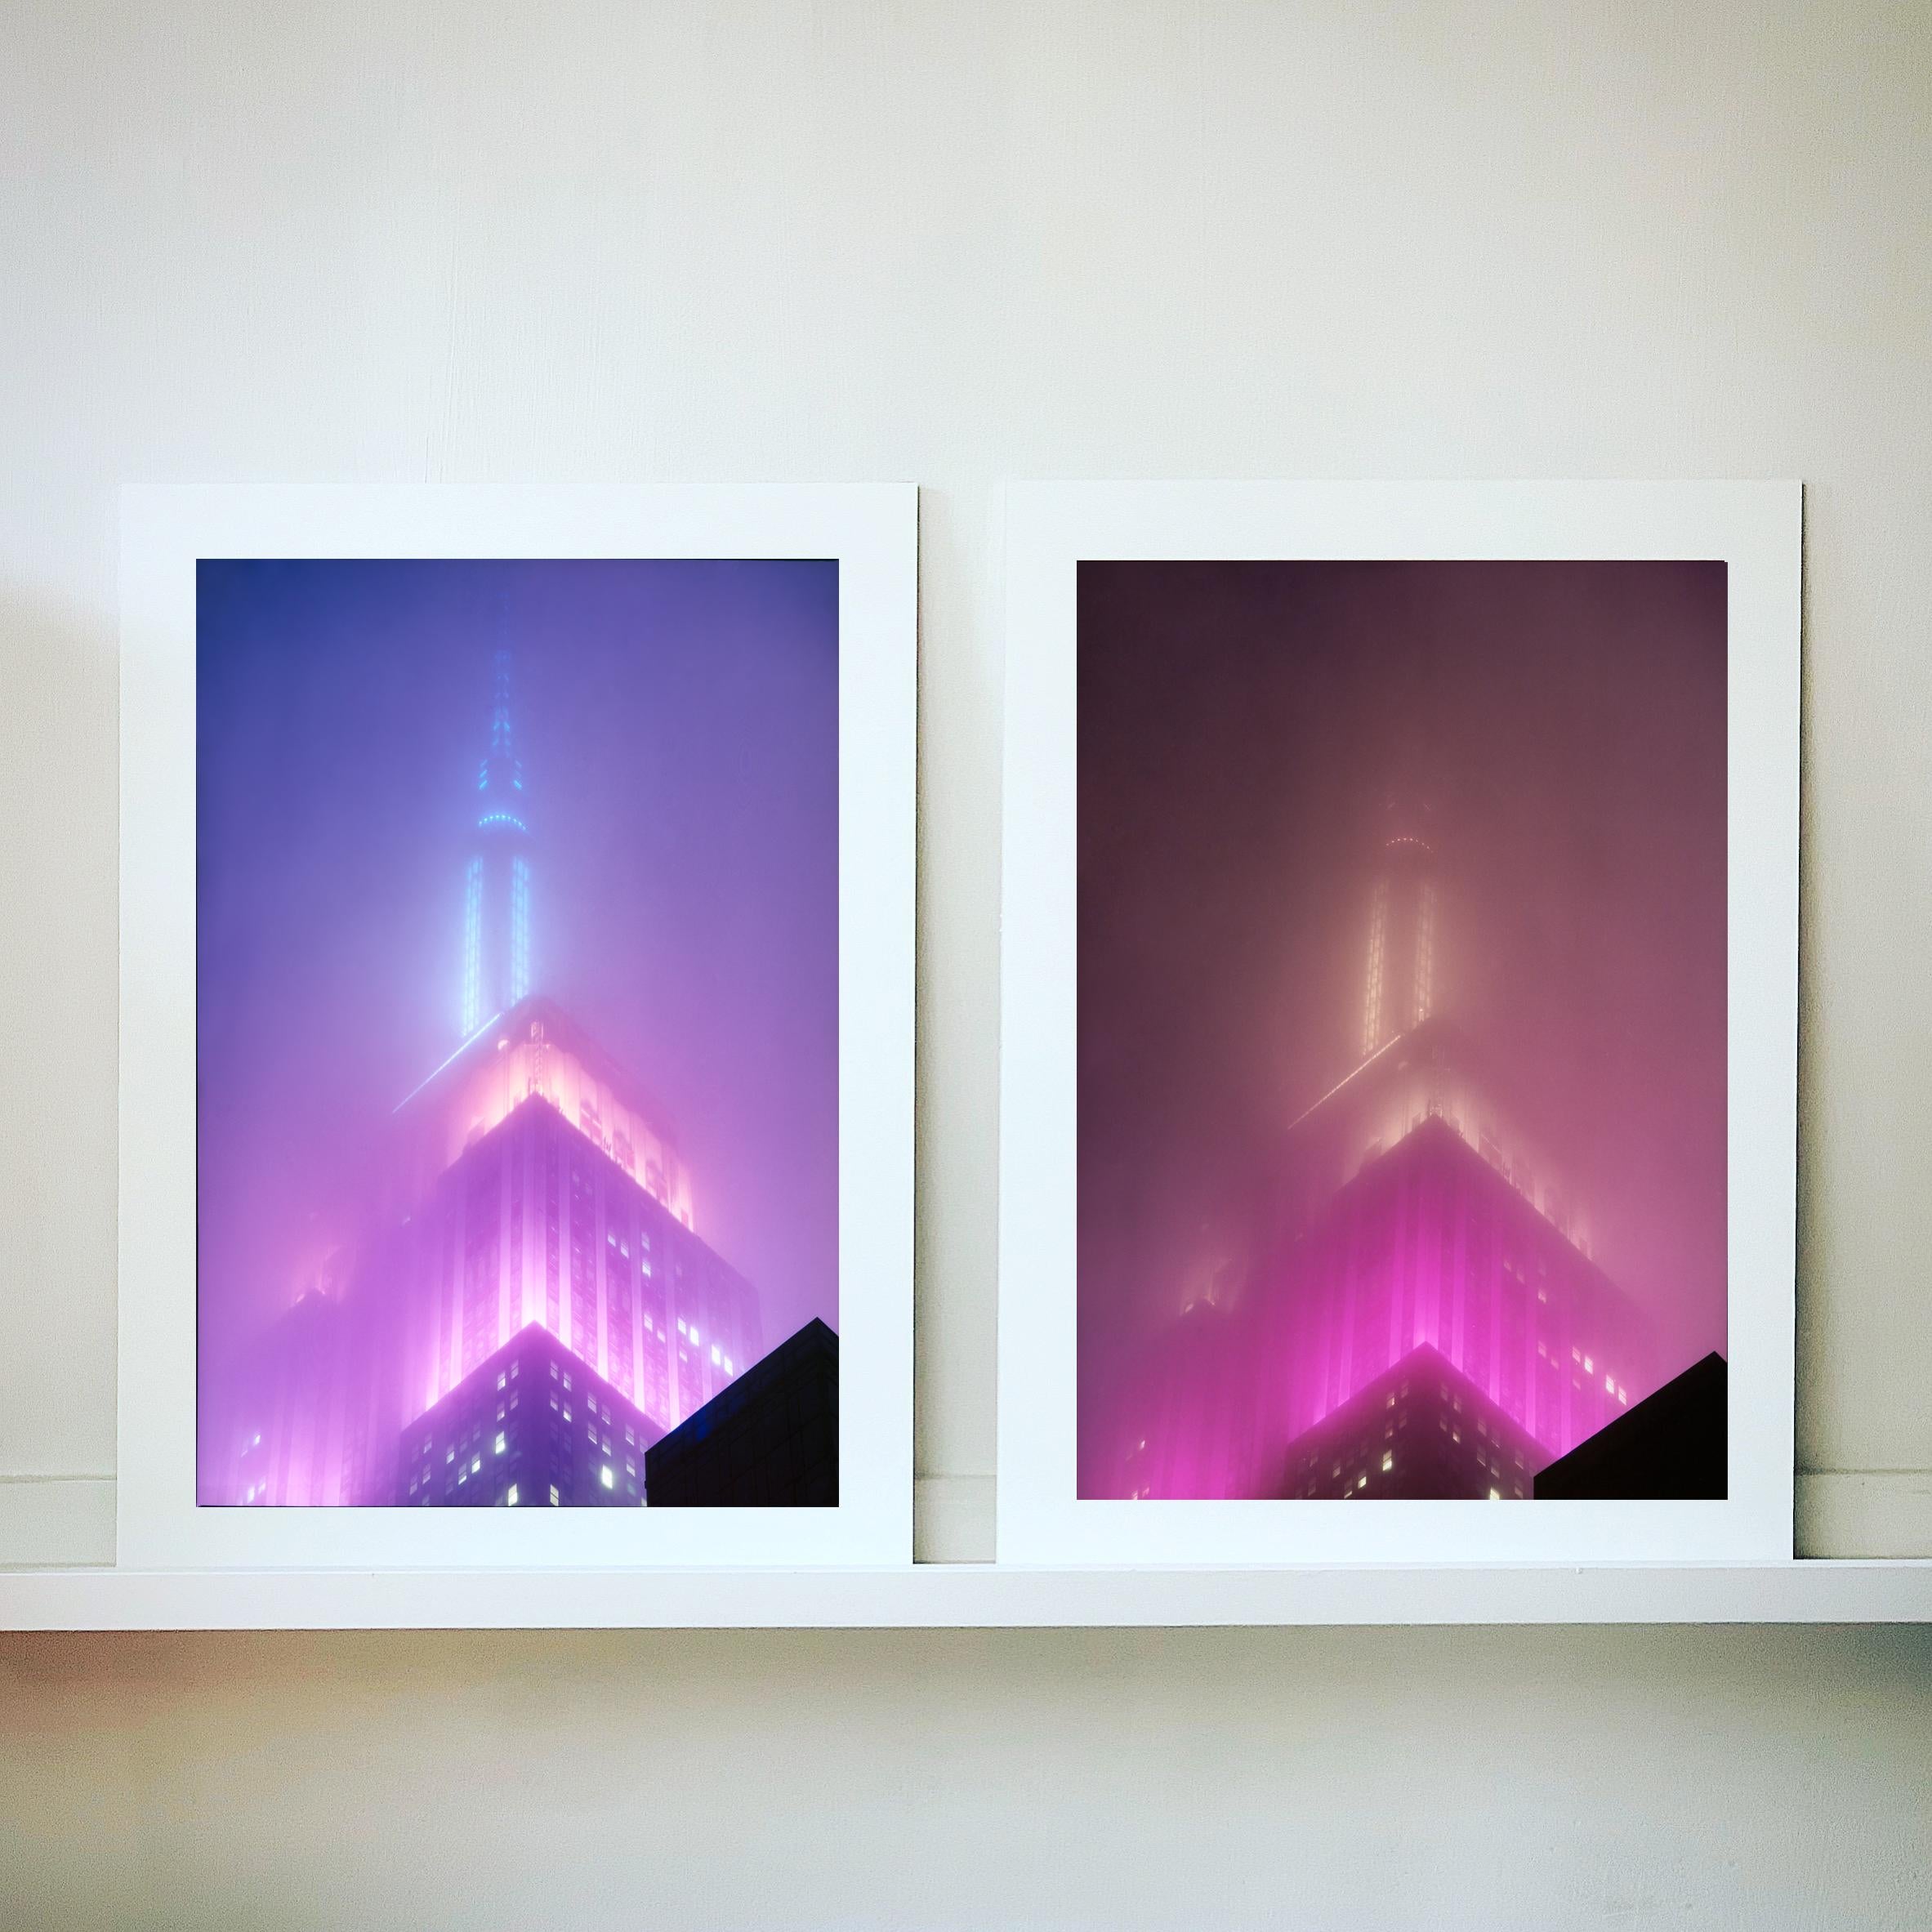 Brand new artwork by Richard Heeps featuring the iconic Empire State building in the mist. Photographed in New York City in 2017, he just executed this in his darkroom, printing it in February 2019
This artwork is part of Richard's portfolio of